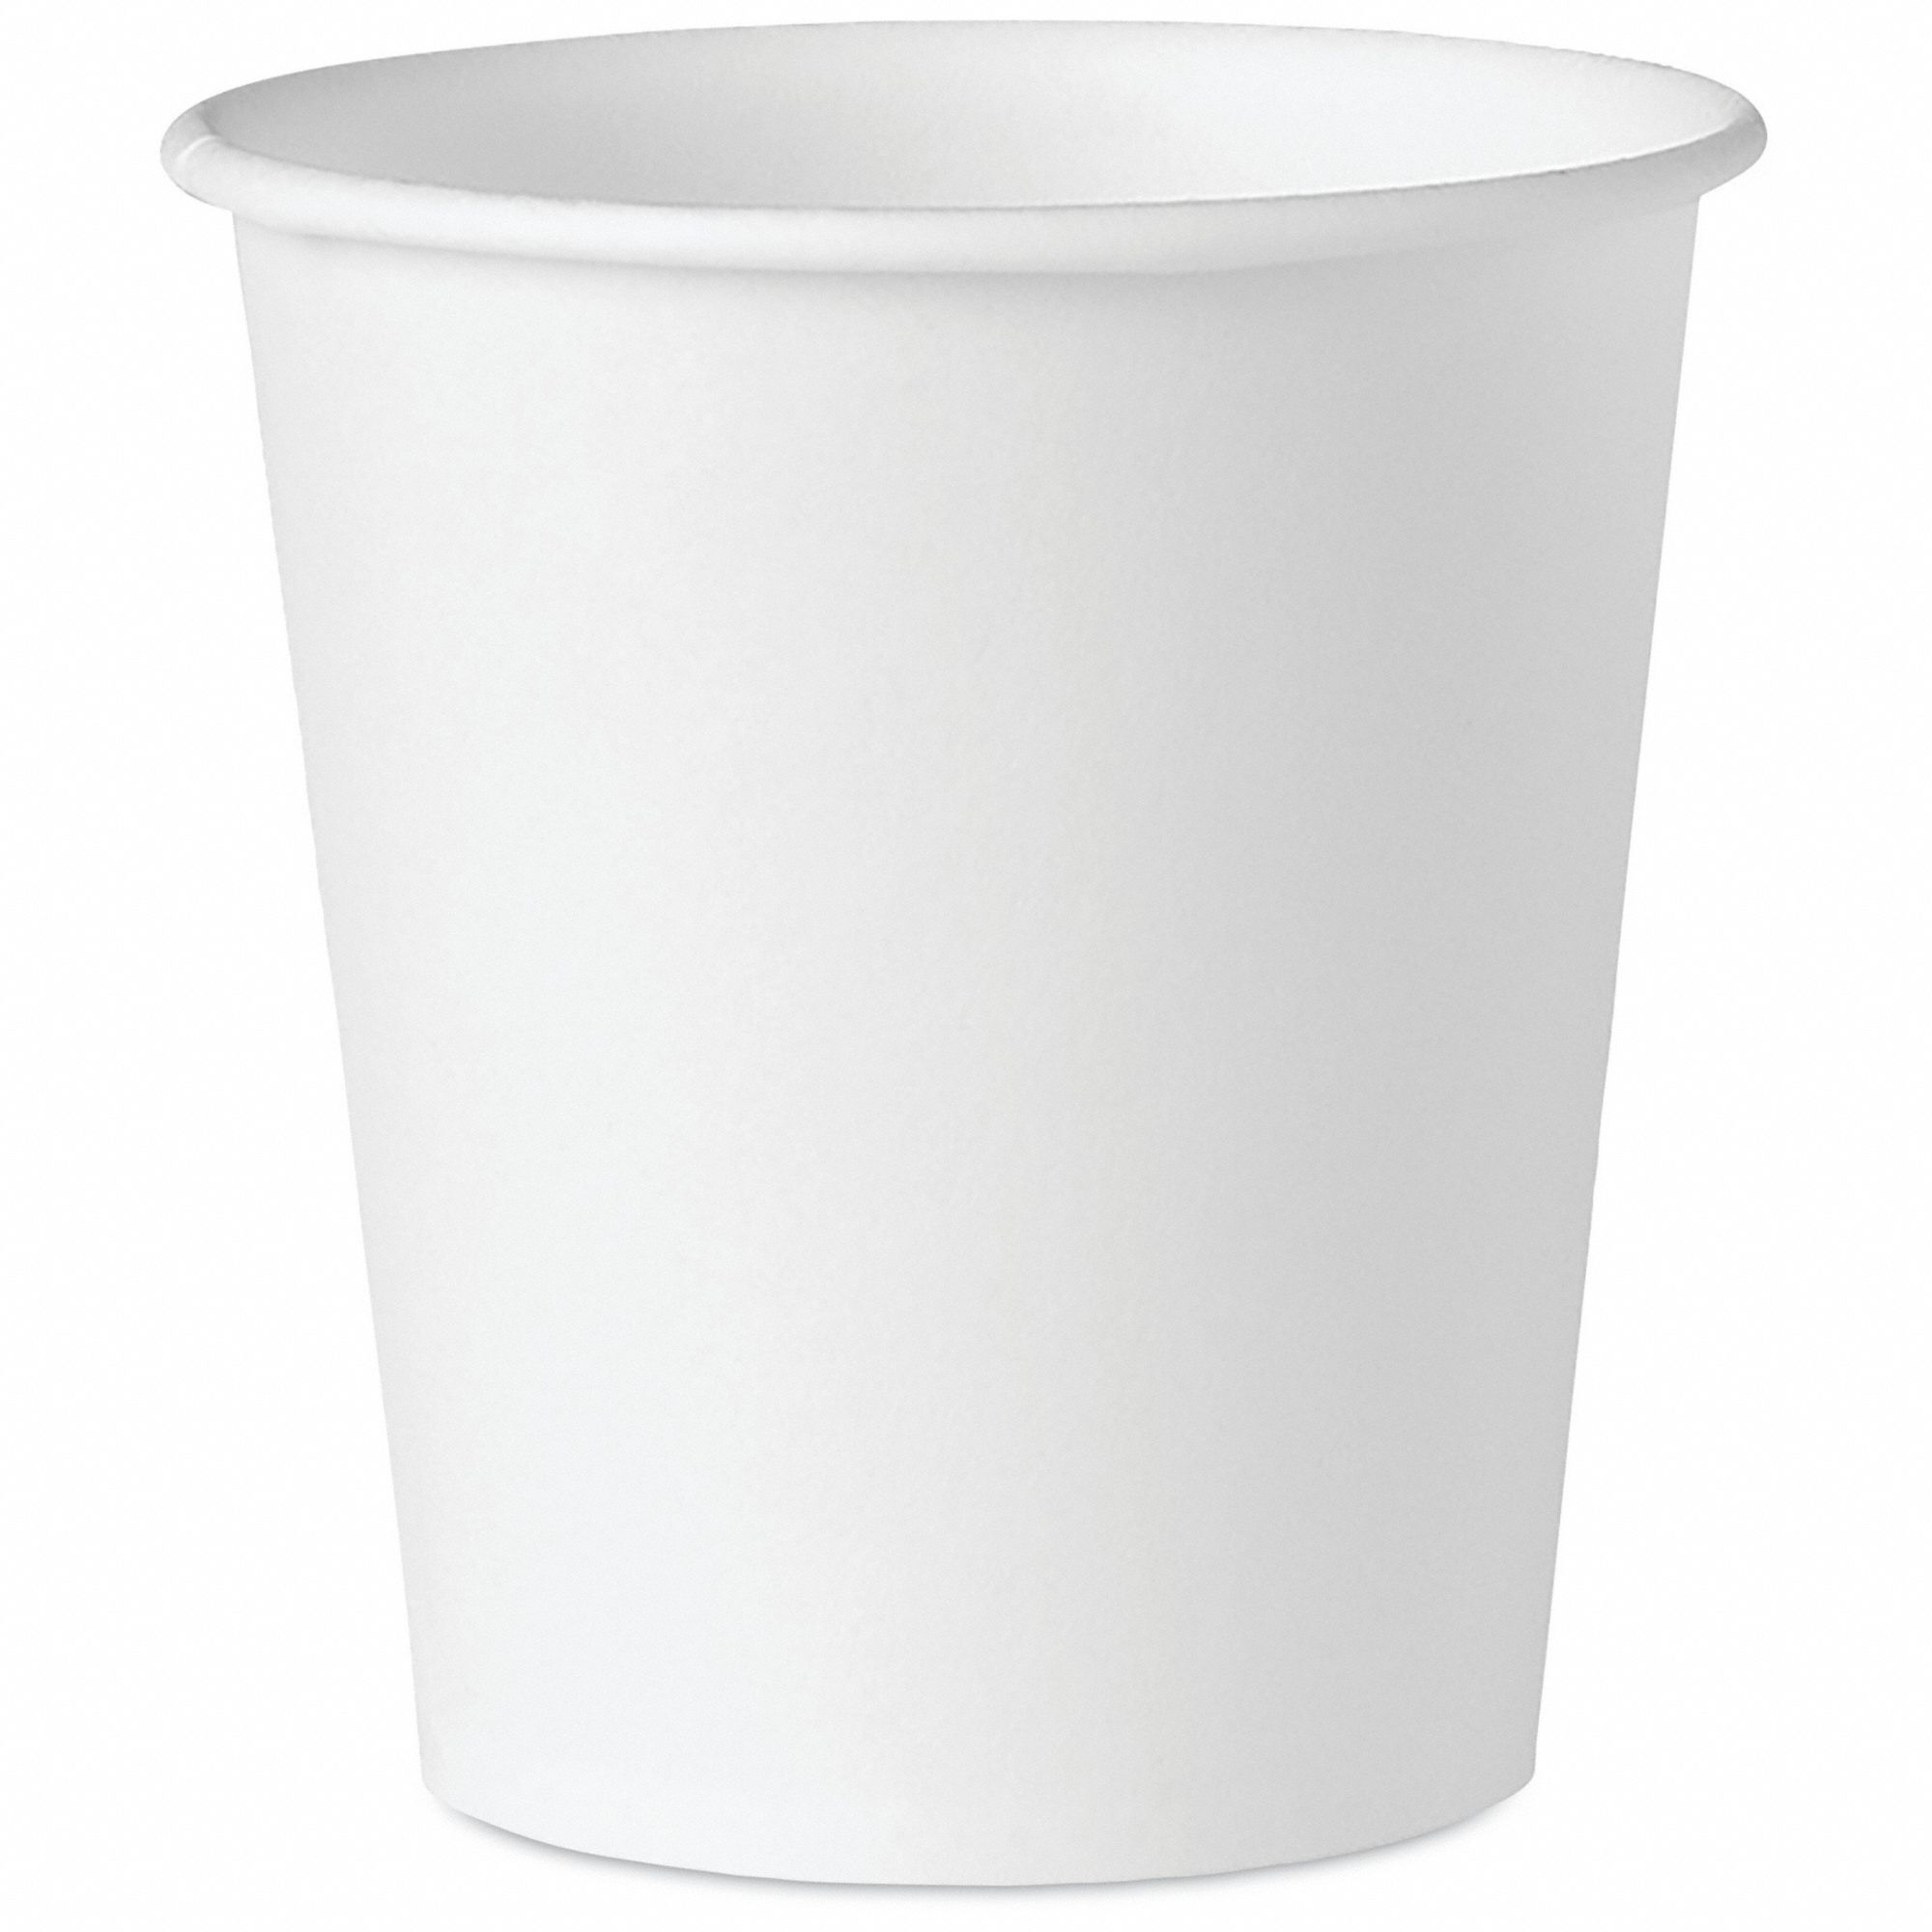 Disposable Cold Cup: 3 oz Capacity, White, Paper, Unwrapped, Patternless, 100 PK